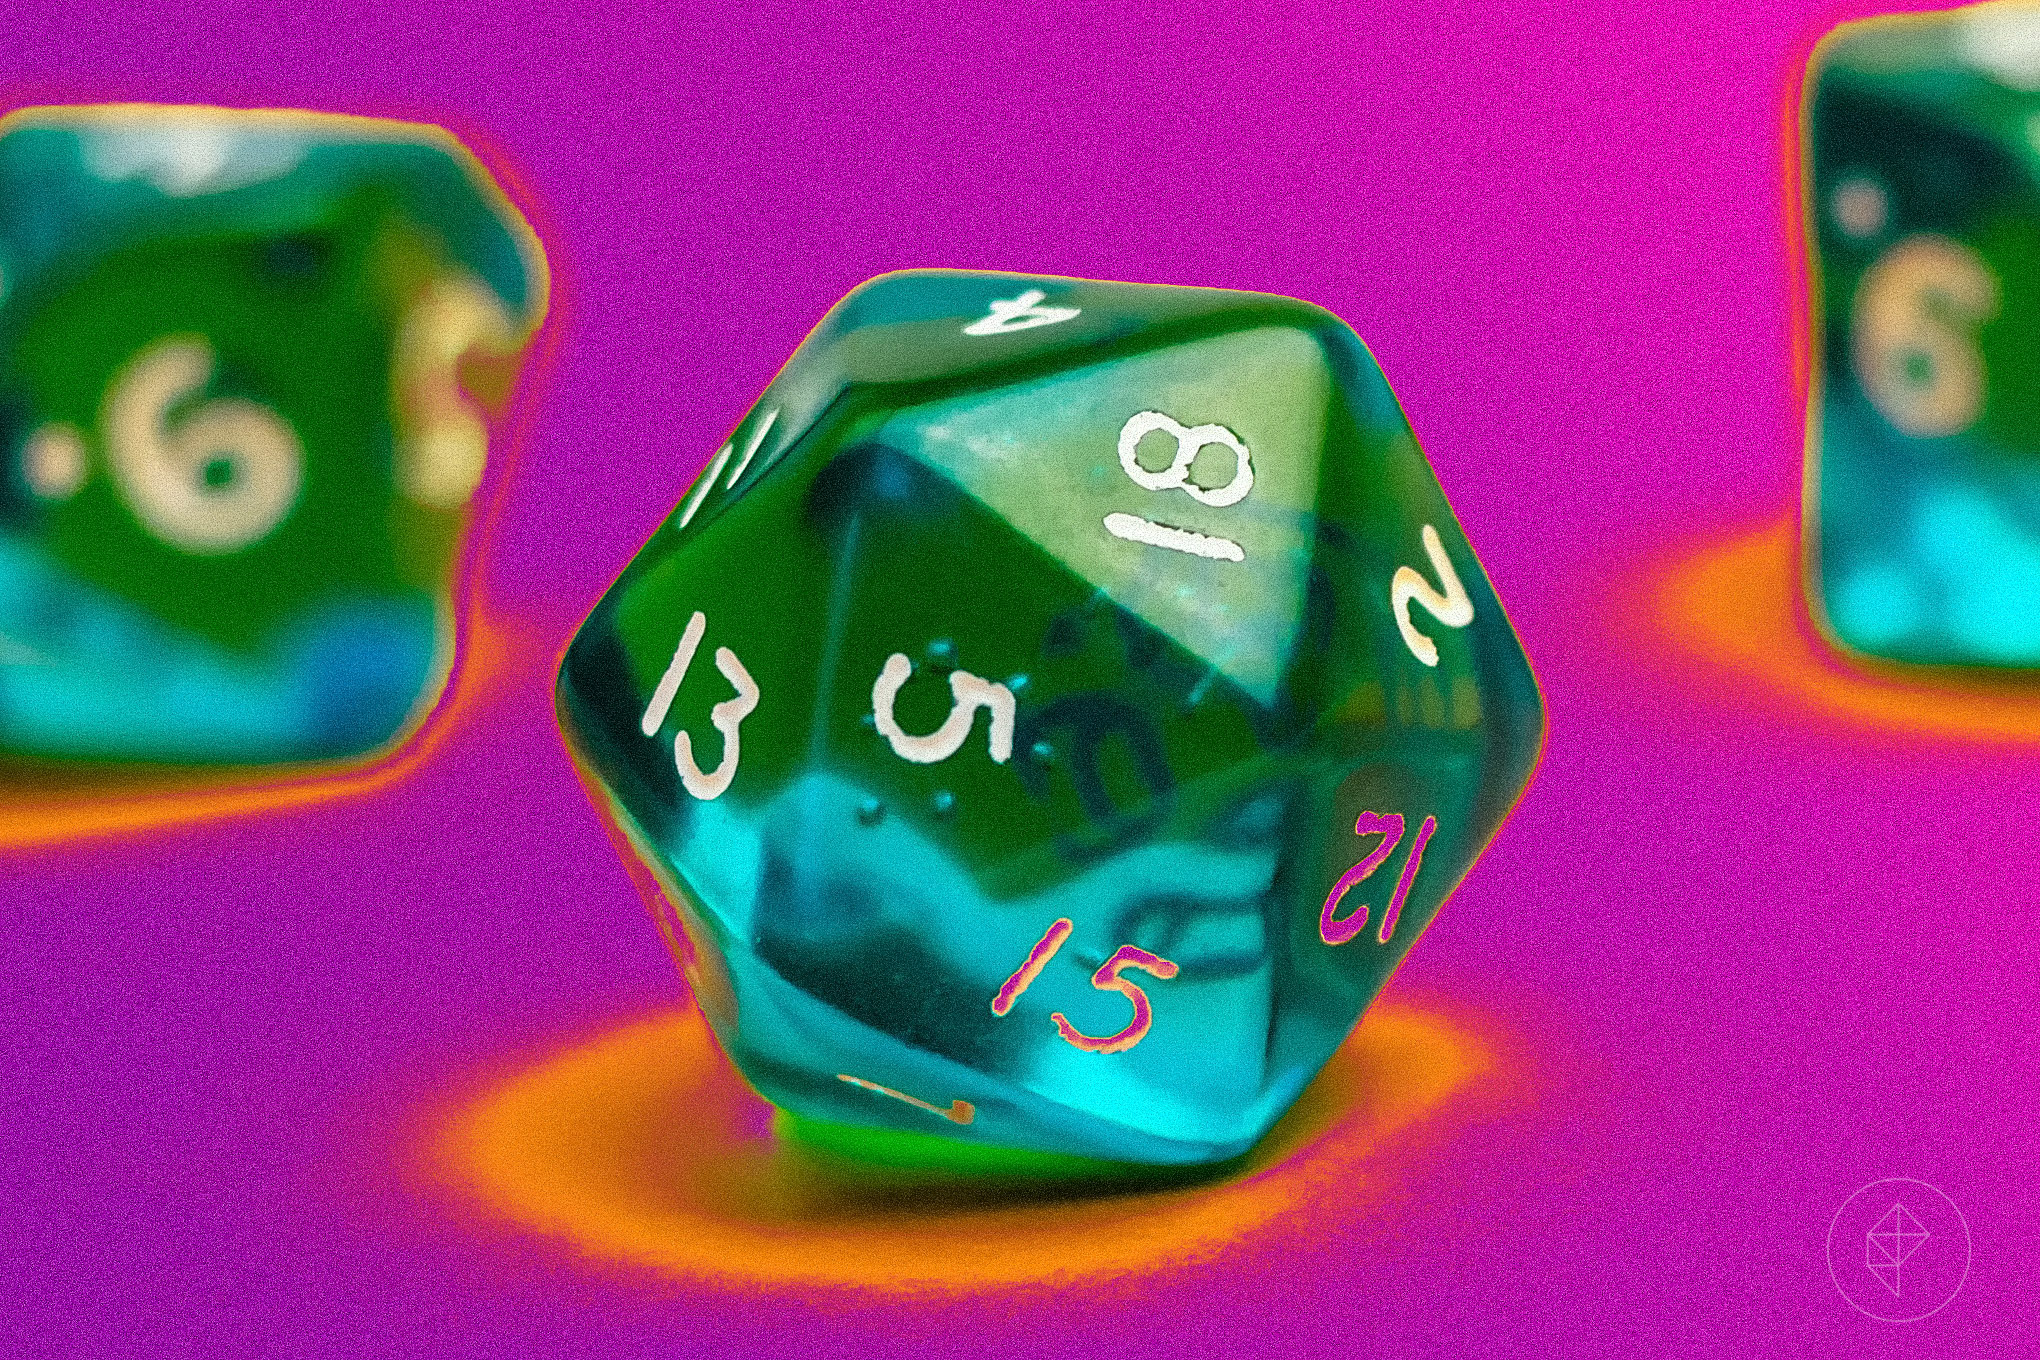 Art of dice used for tabletop gaming.